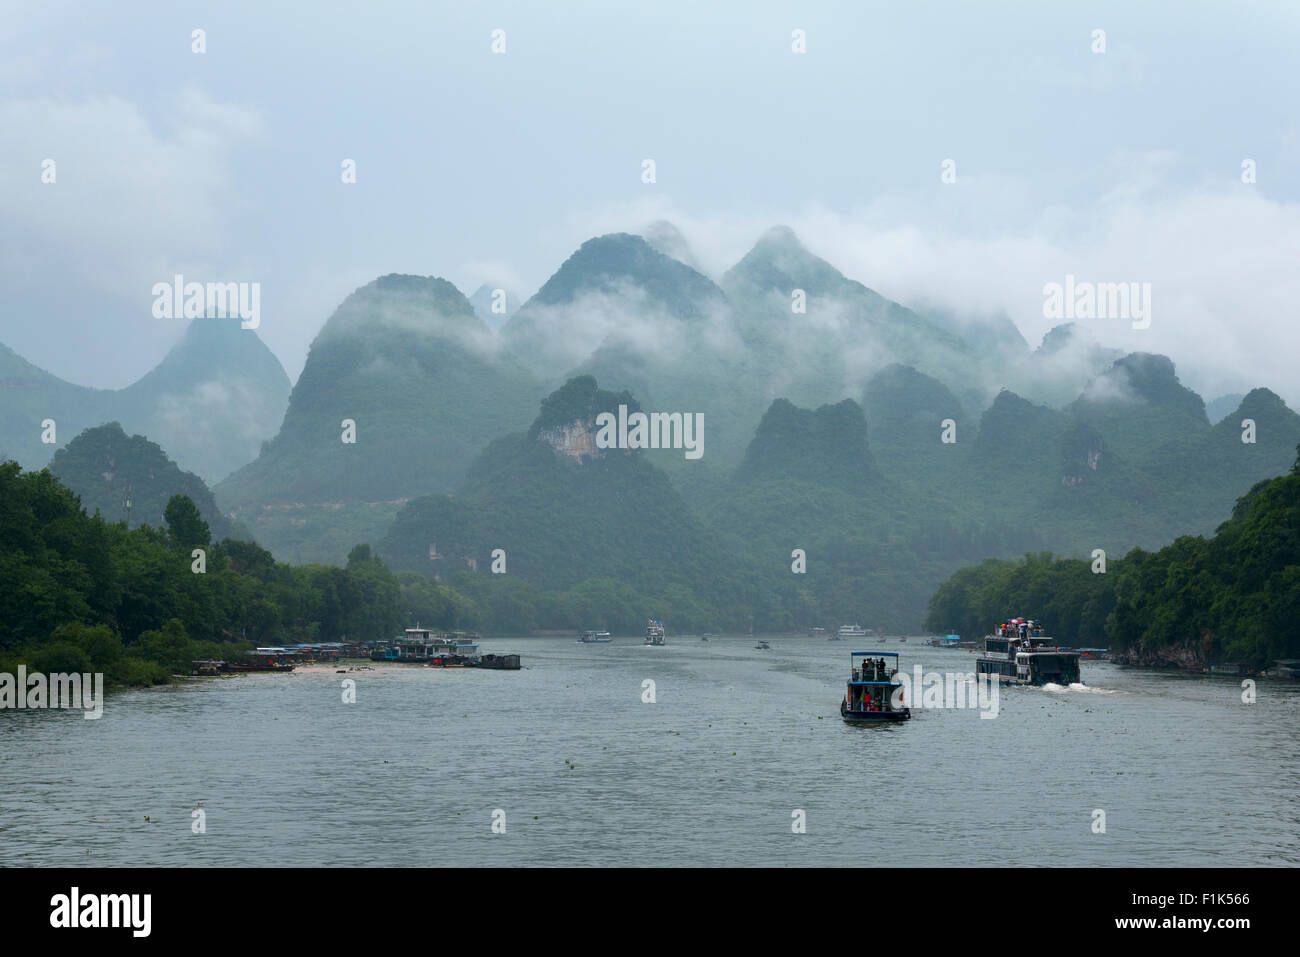 small boats and the cruise ships on Li river in China against transcendental mountains and tropical vegetation Stock Photo